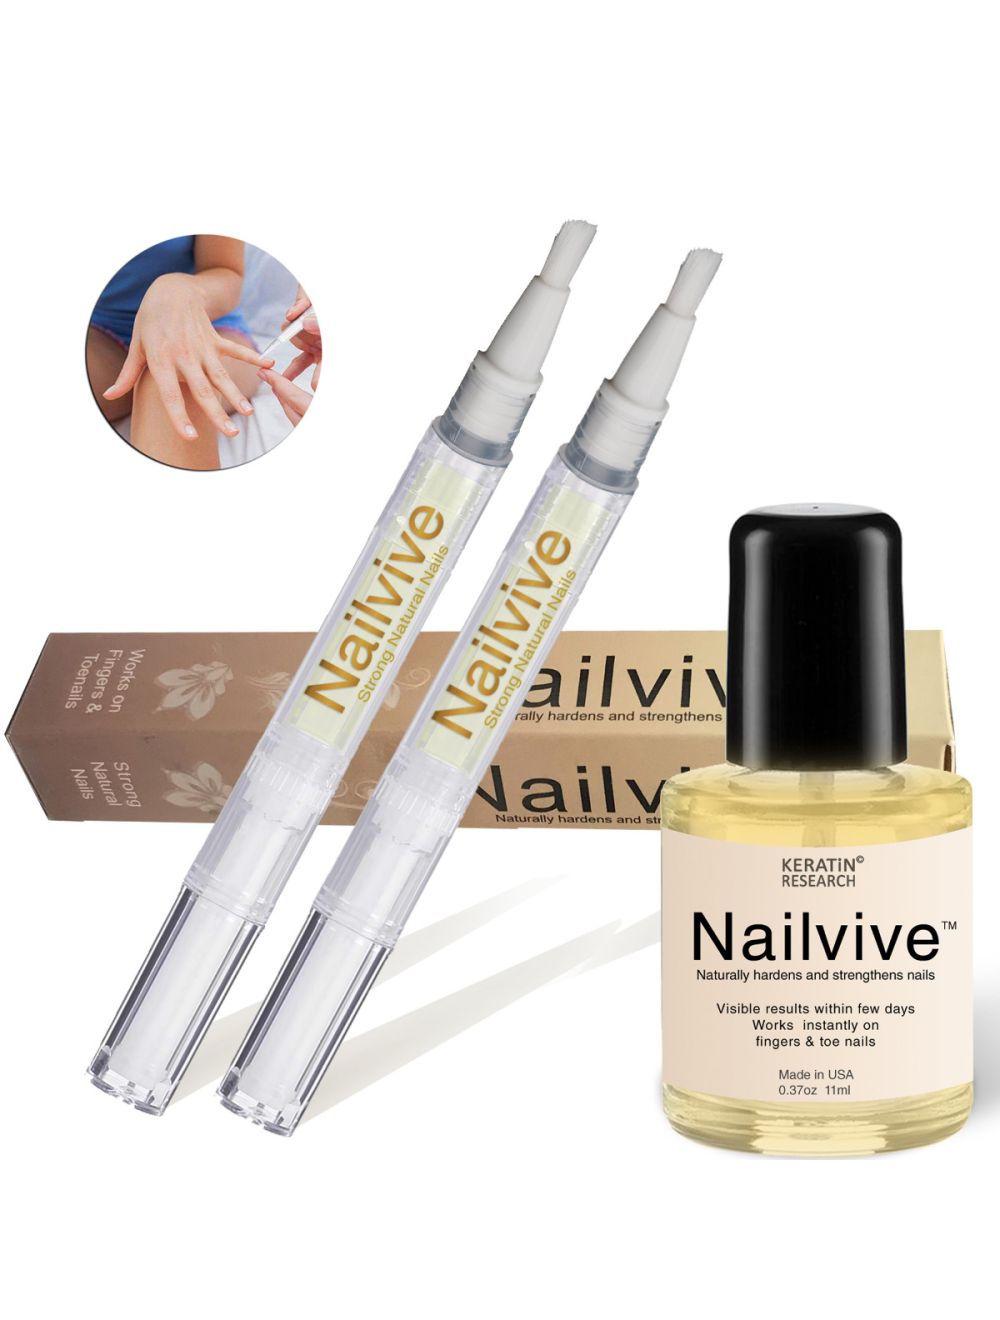 NAILVIVE Nail Serum Powerful Silk Protein Proven Natural Formula  Strengthening Hardening nails Instantly Prevents Splits Chips Peels Cracks  on Your Nails protect with Wheat Protein Hydrolyzed Keratin